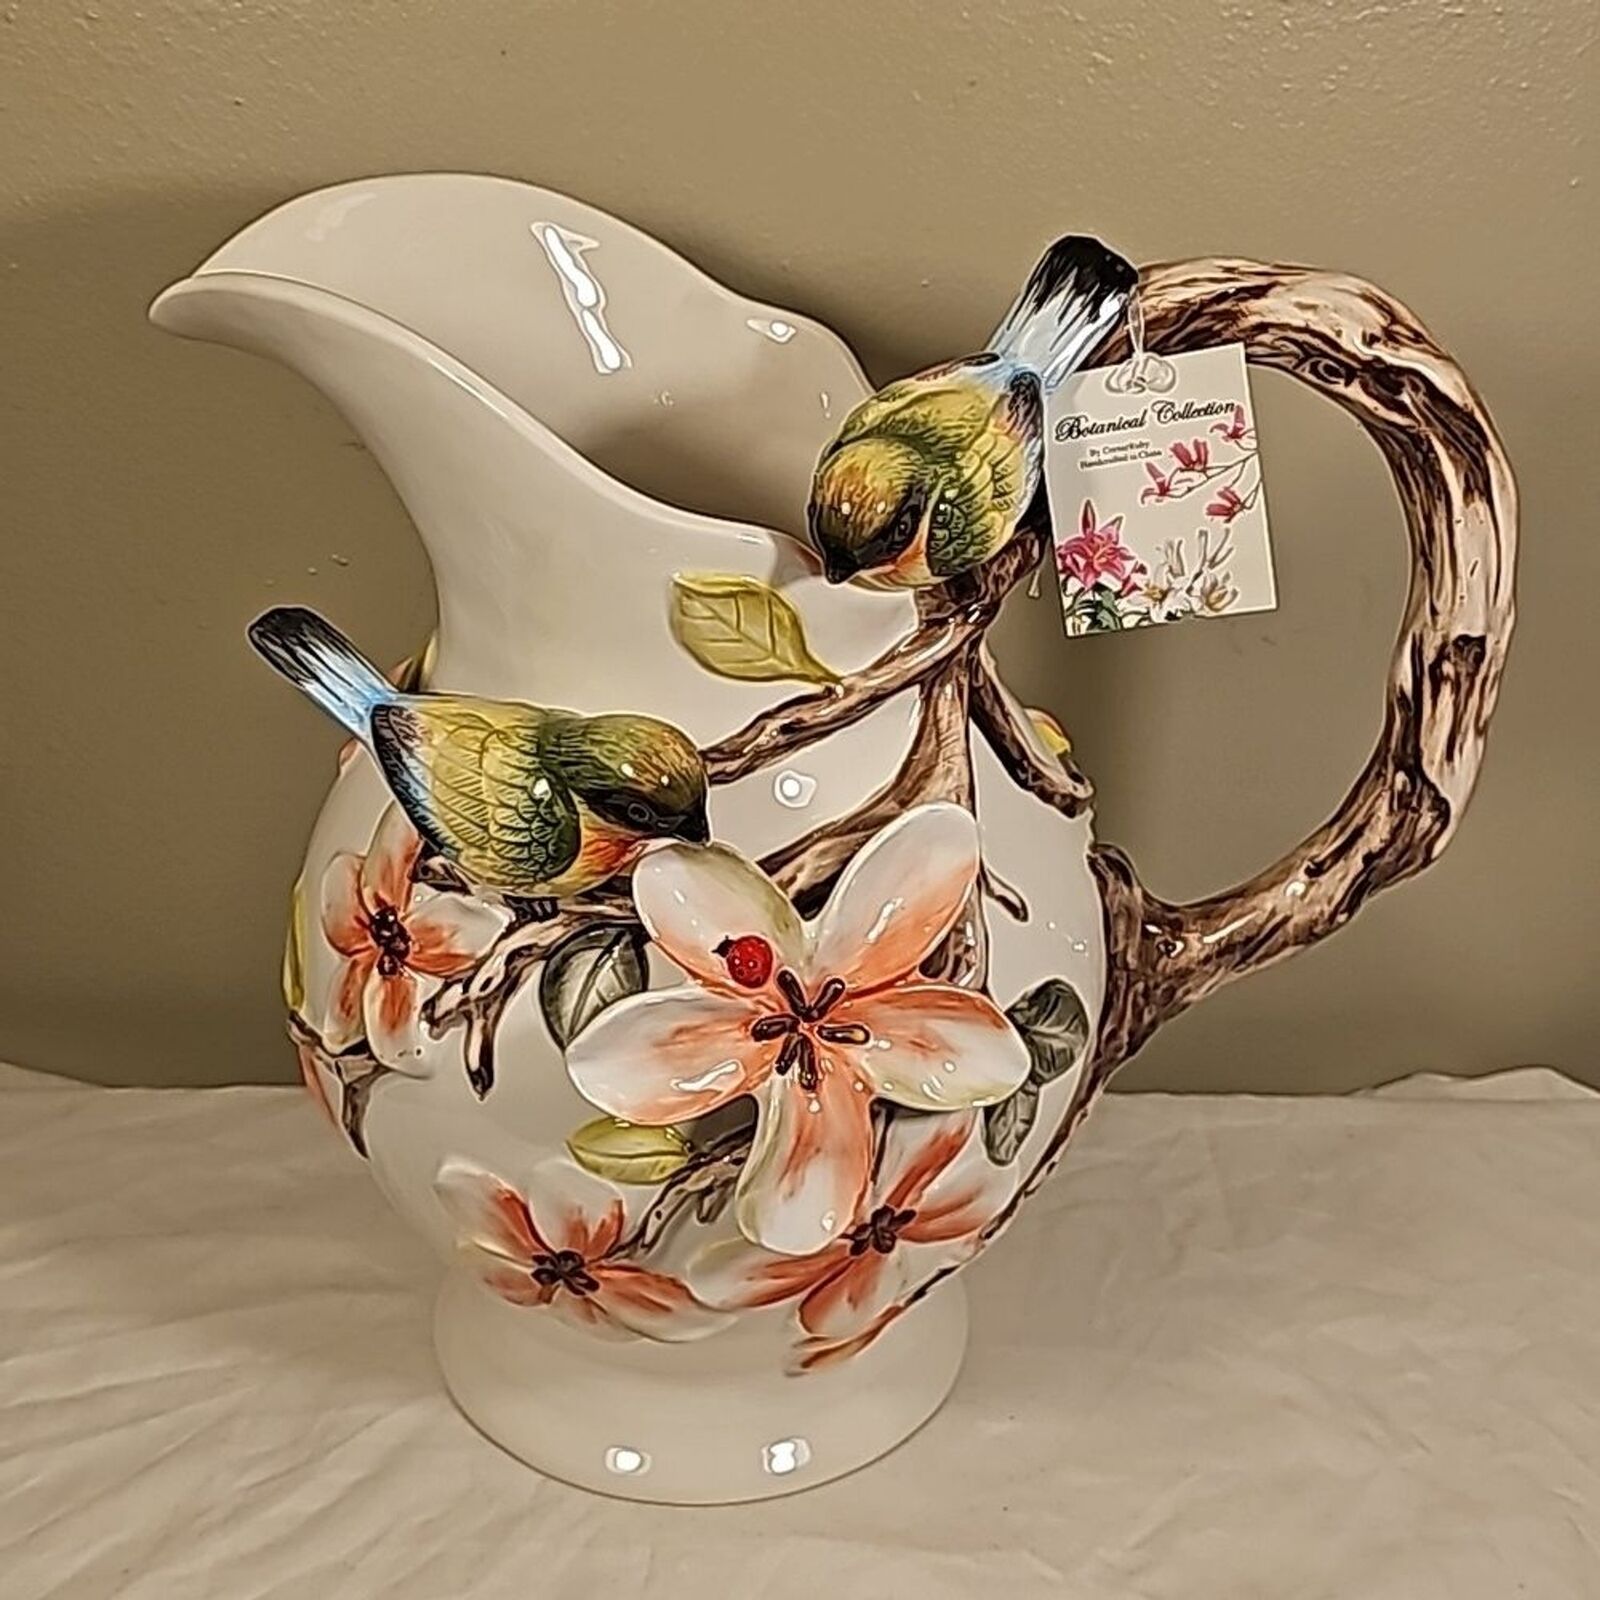 Unique artistic 3D pitcher vase birds flowers brand new with tags